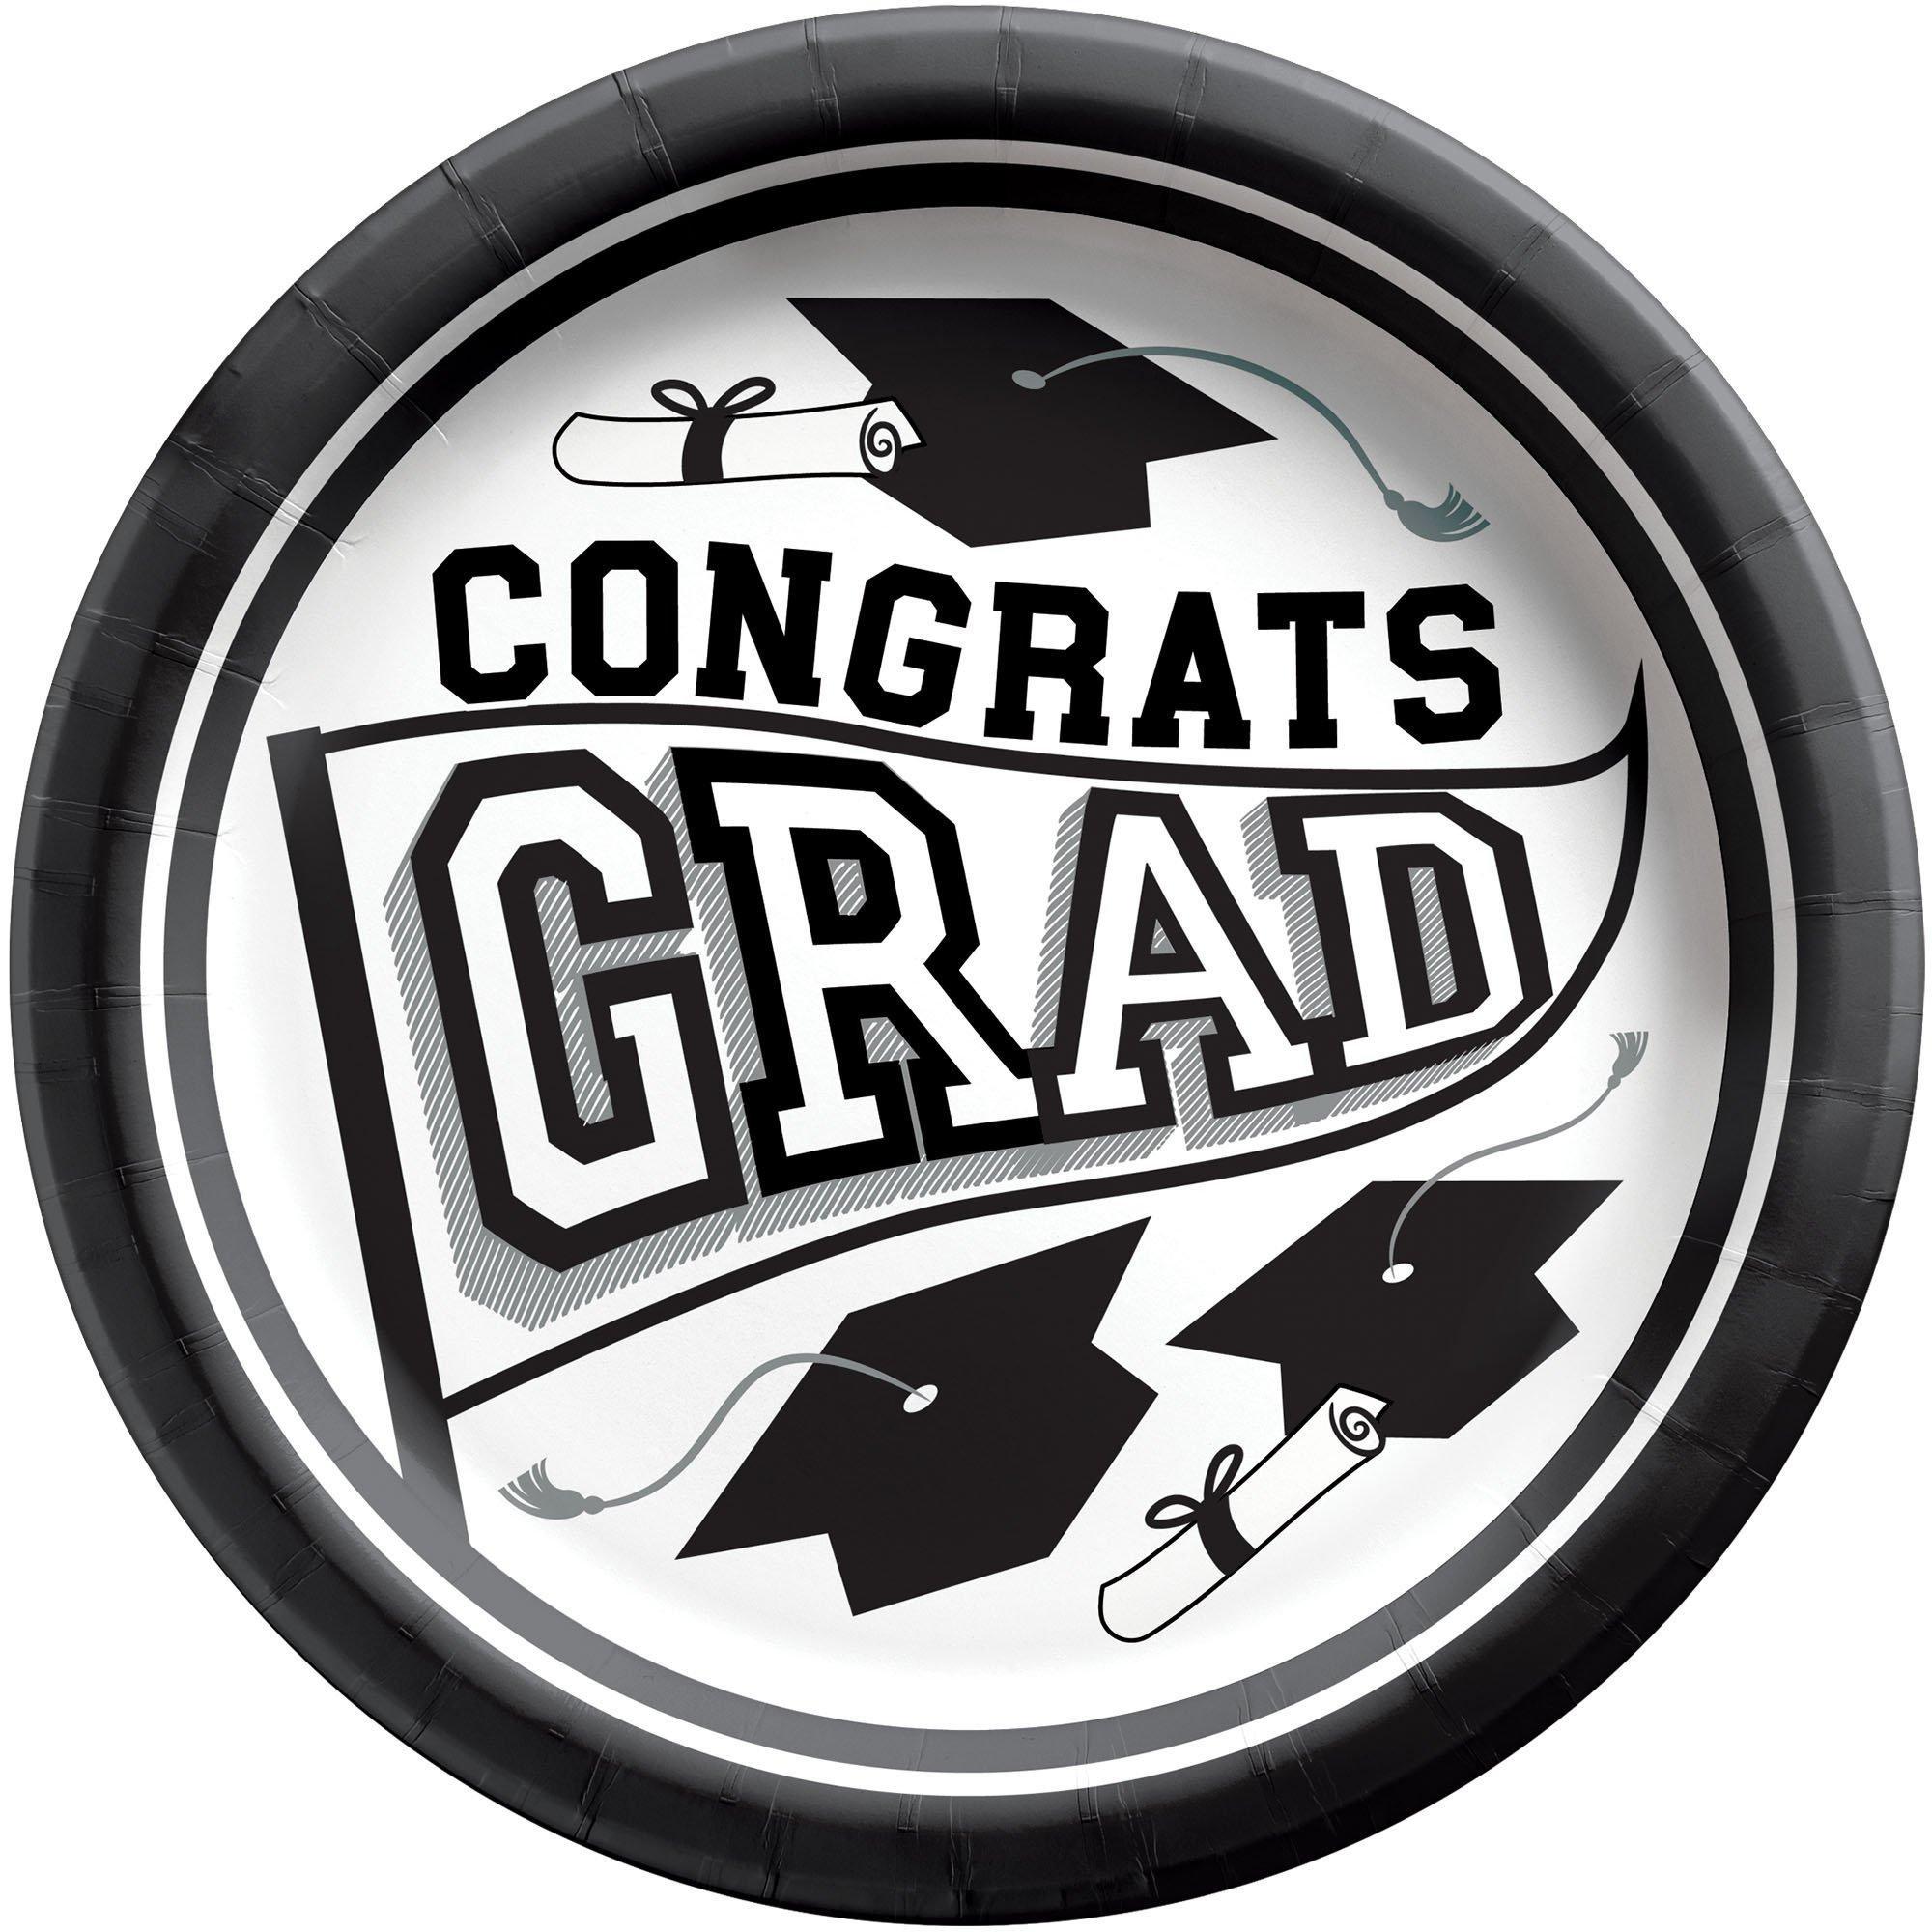 Graduation Party Supplies Kit for 40 with Decorations, Banners, Balloons, Plates, Napkins - White Congrats